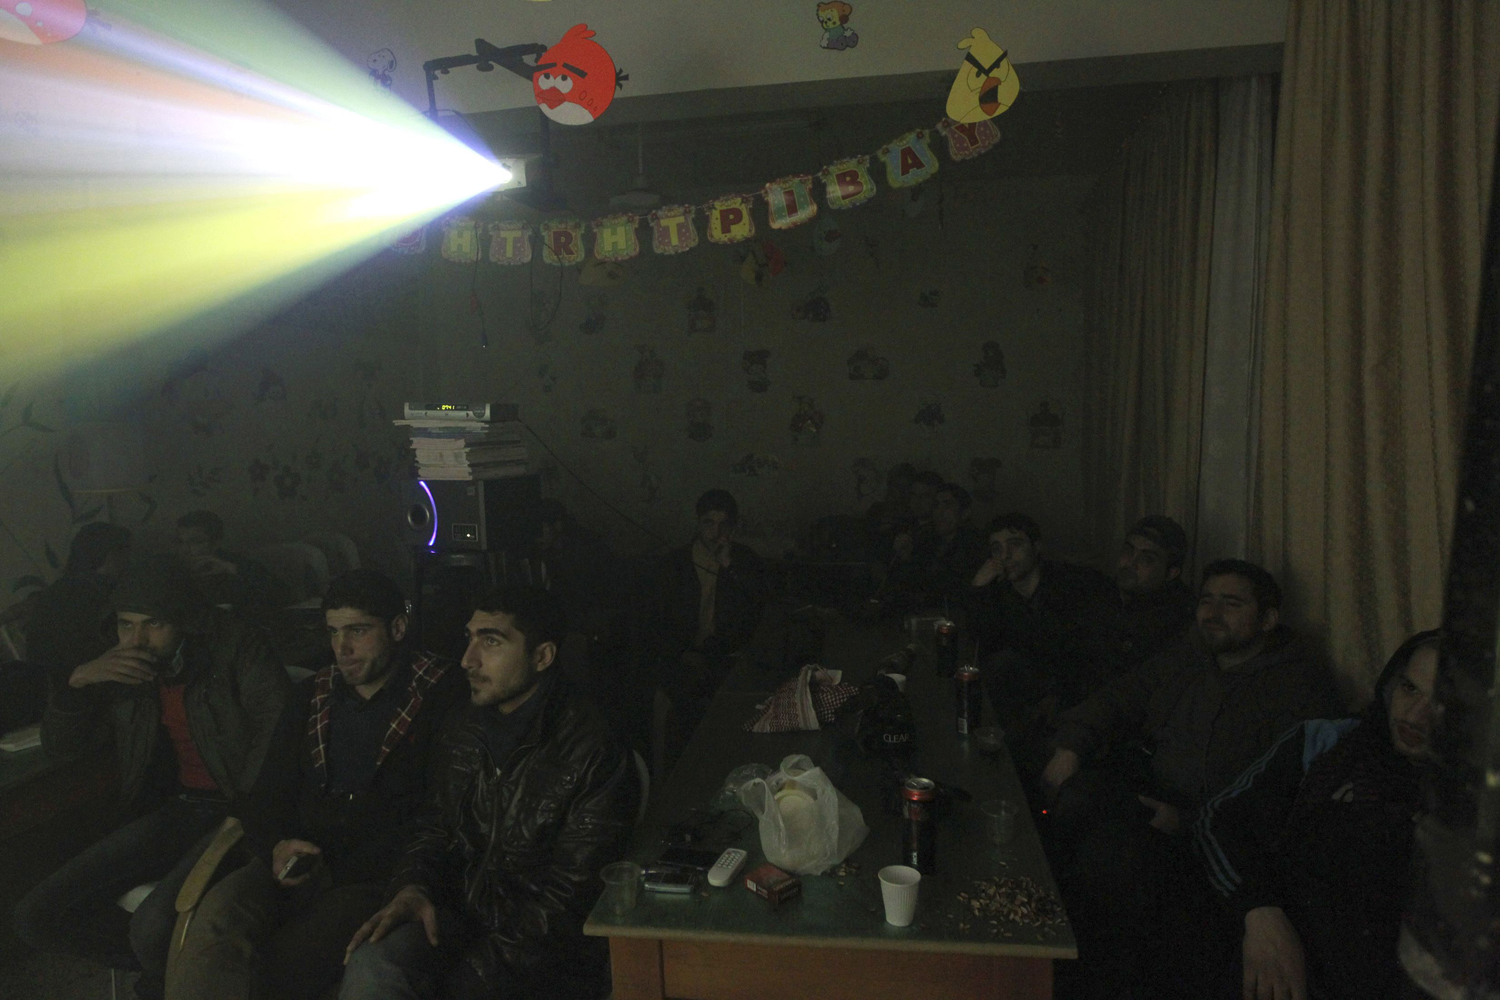 Activists watch a televised broadcast of the Champions League soccer match between Barcelona and AC Milan in a school hall in Aleppo